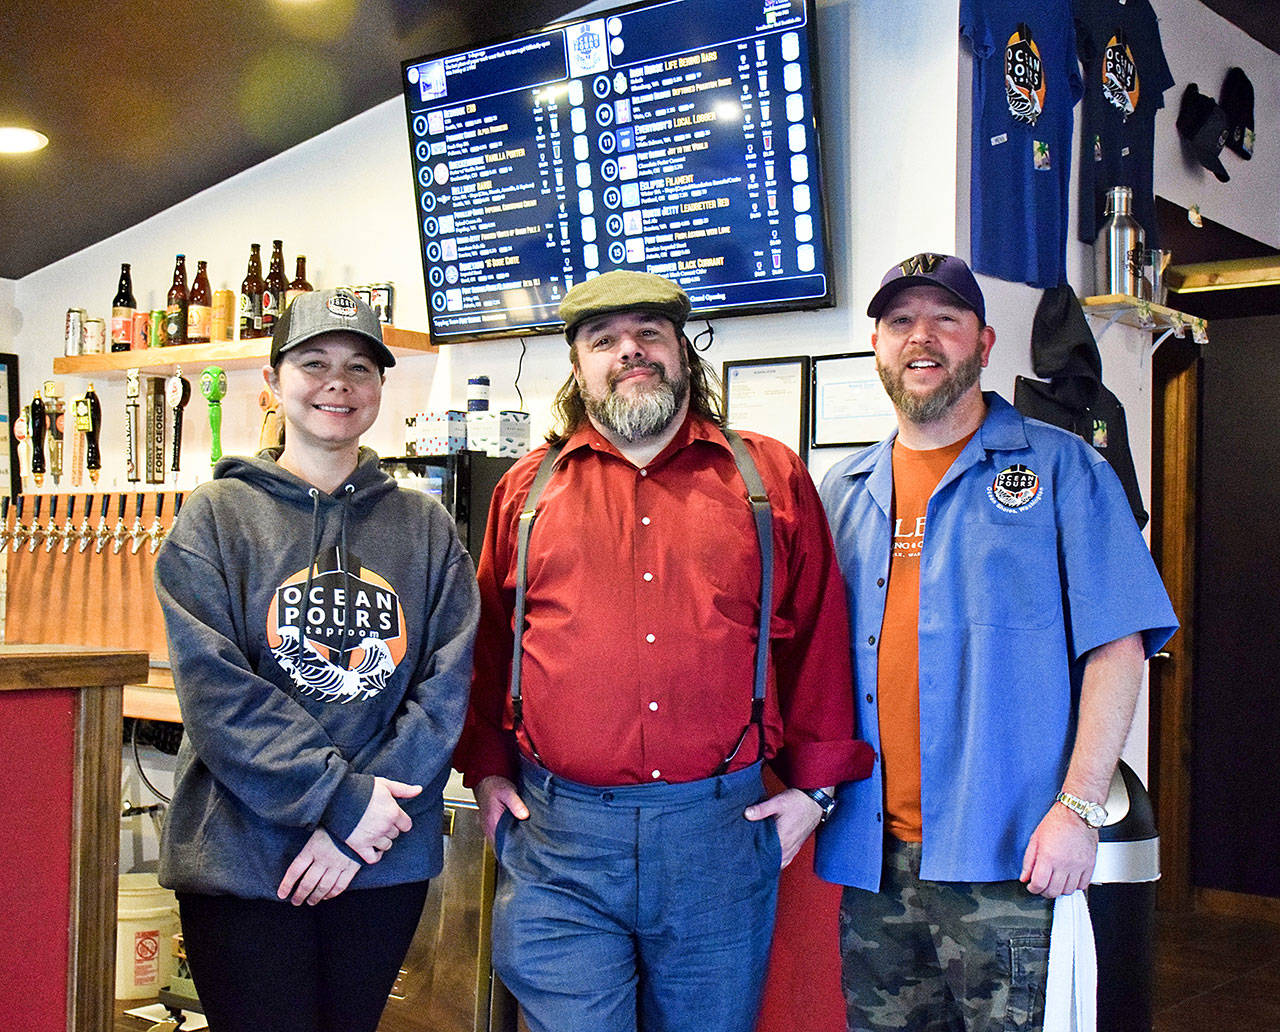 New ventures in OS include medical service, taproom